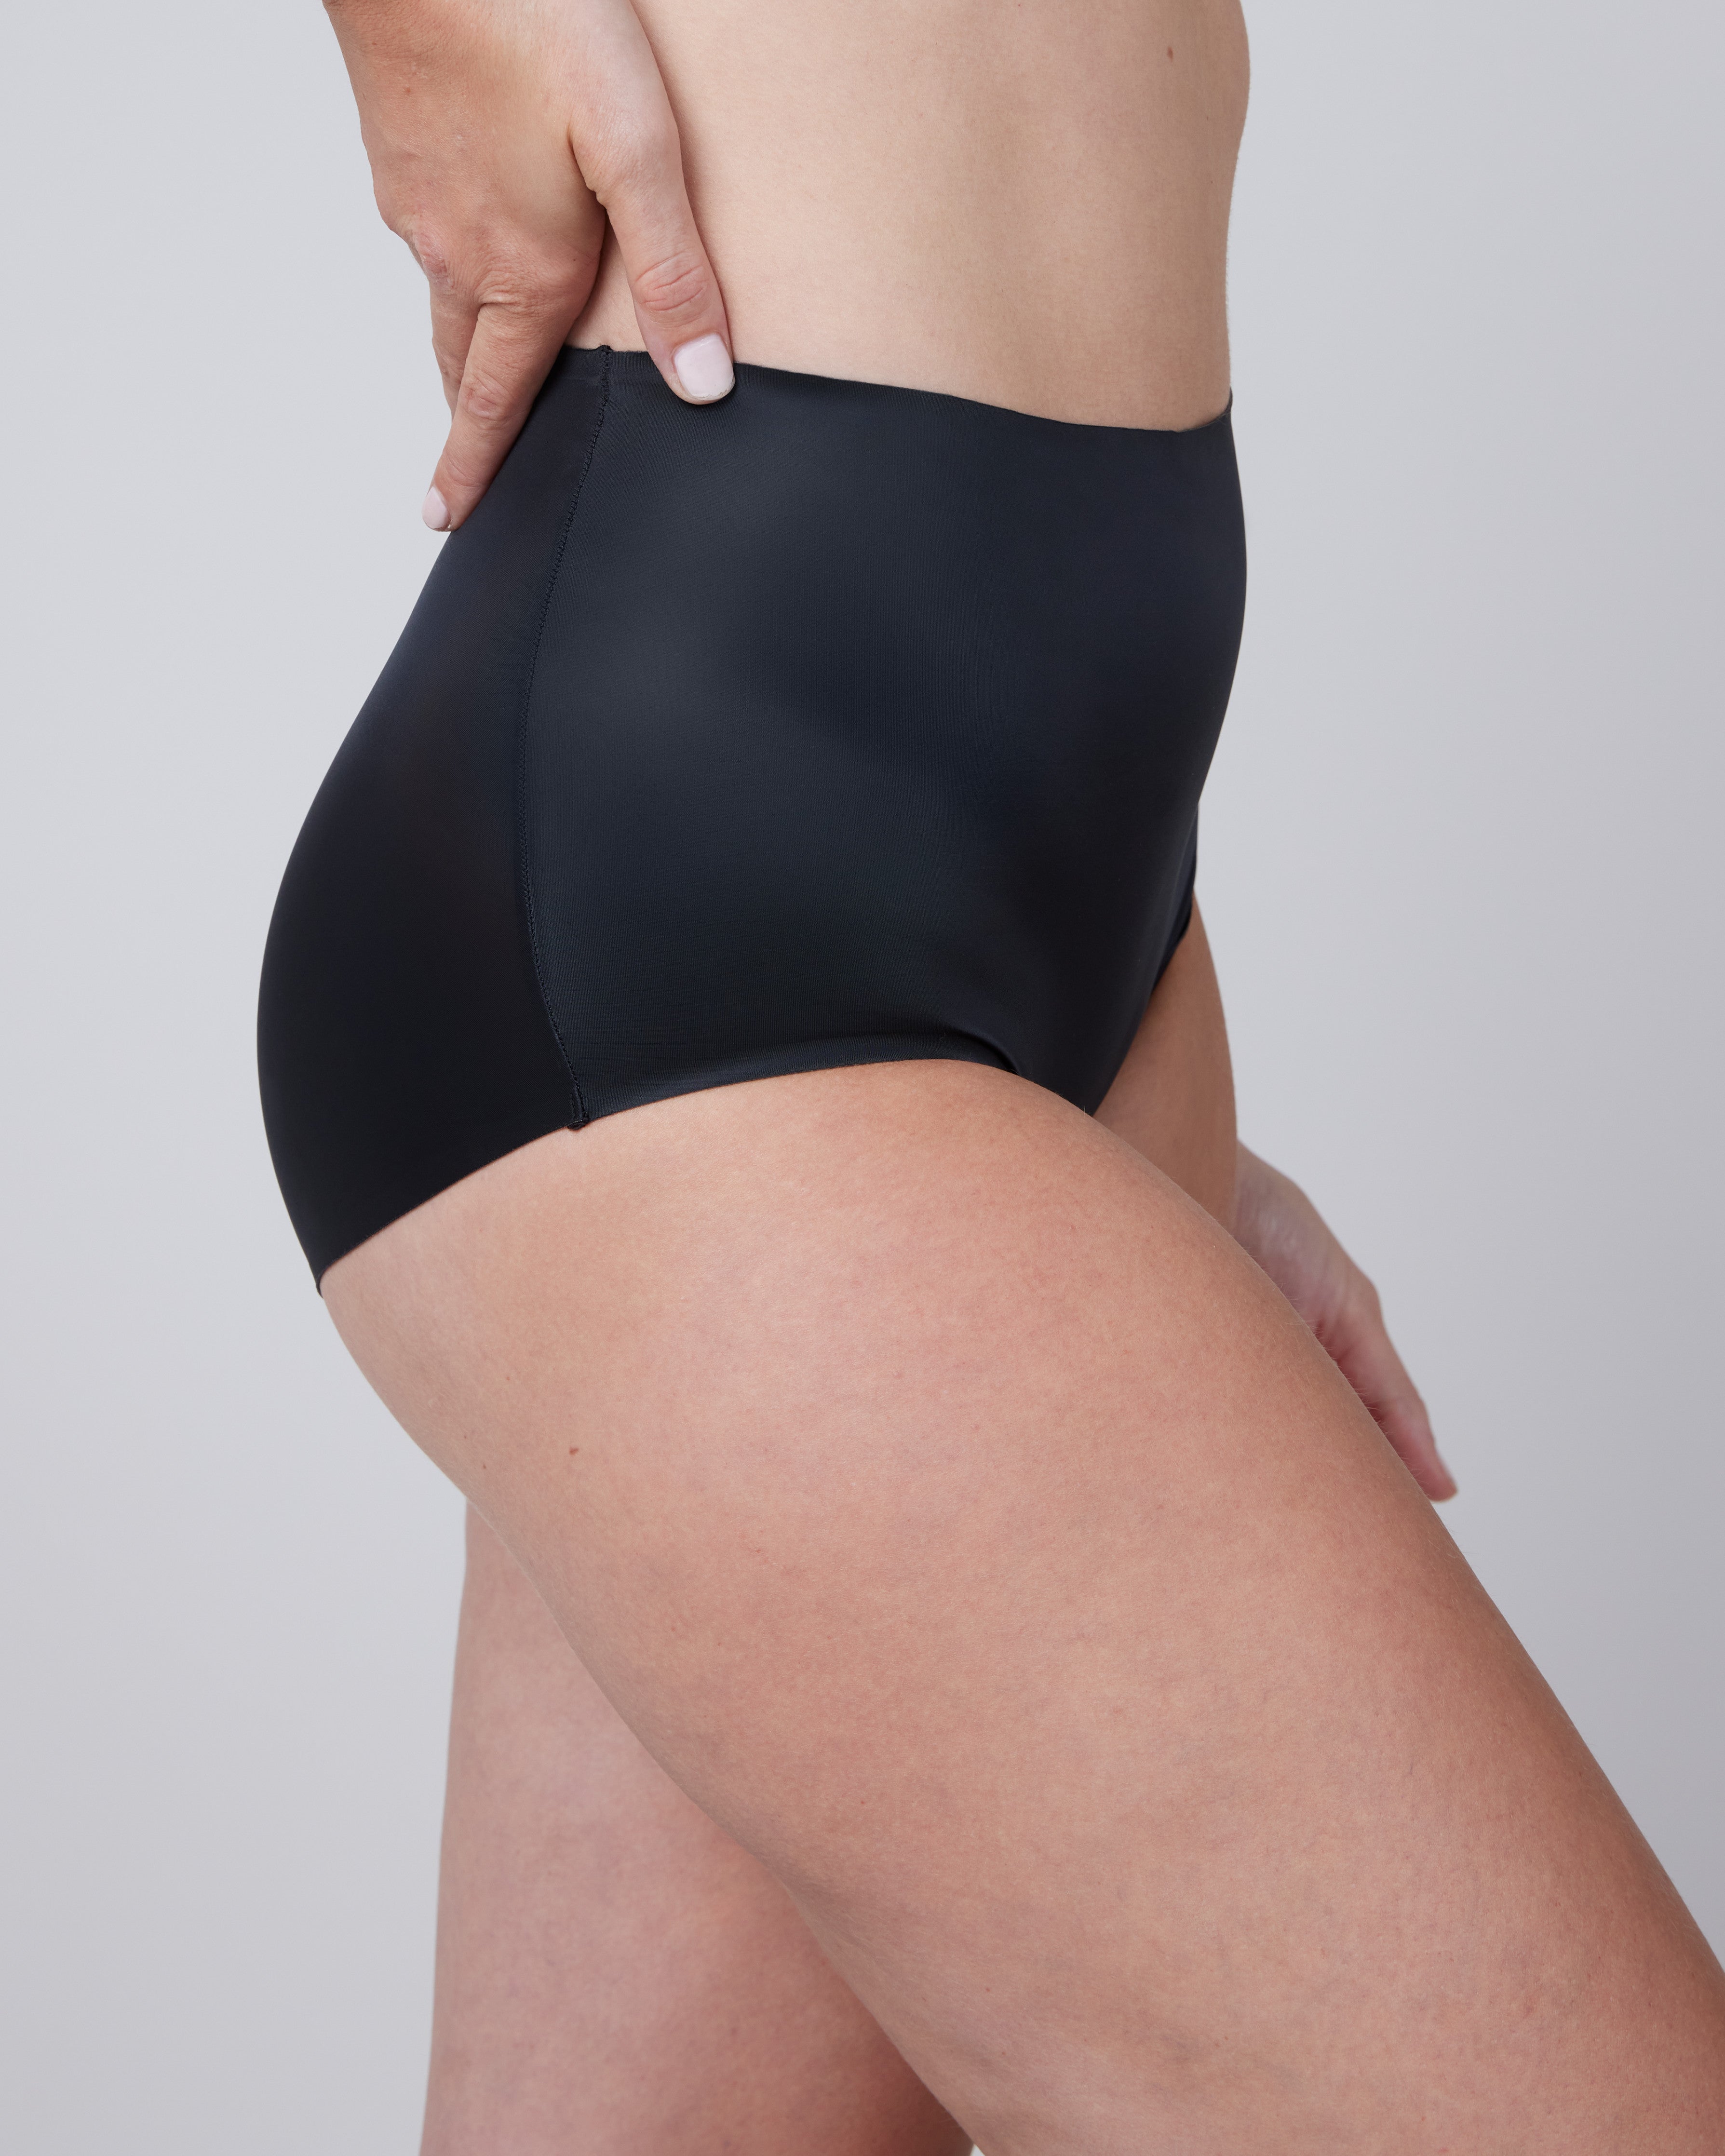 Regular Size S Spanx Seamless Brief Panties for Women for sale